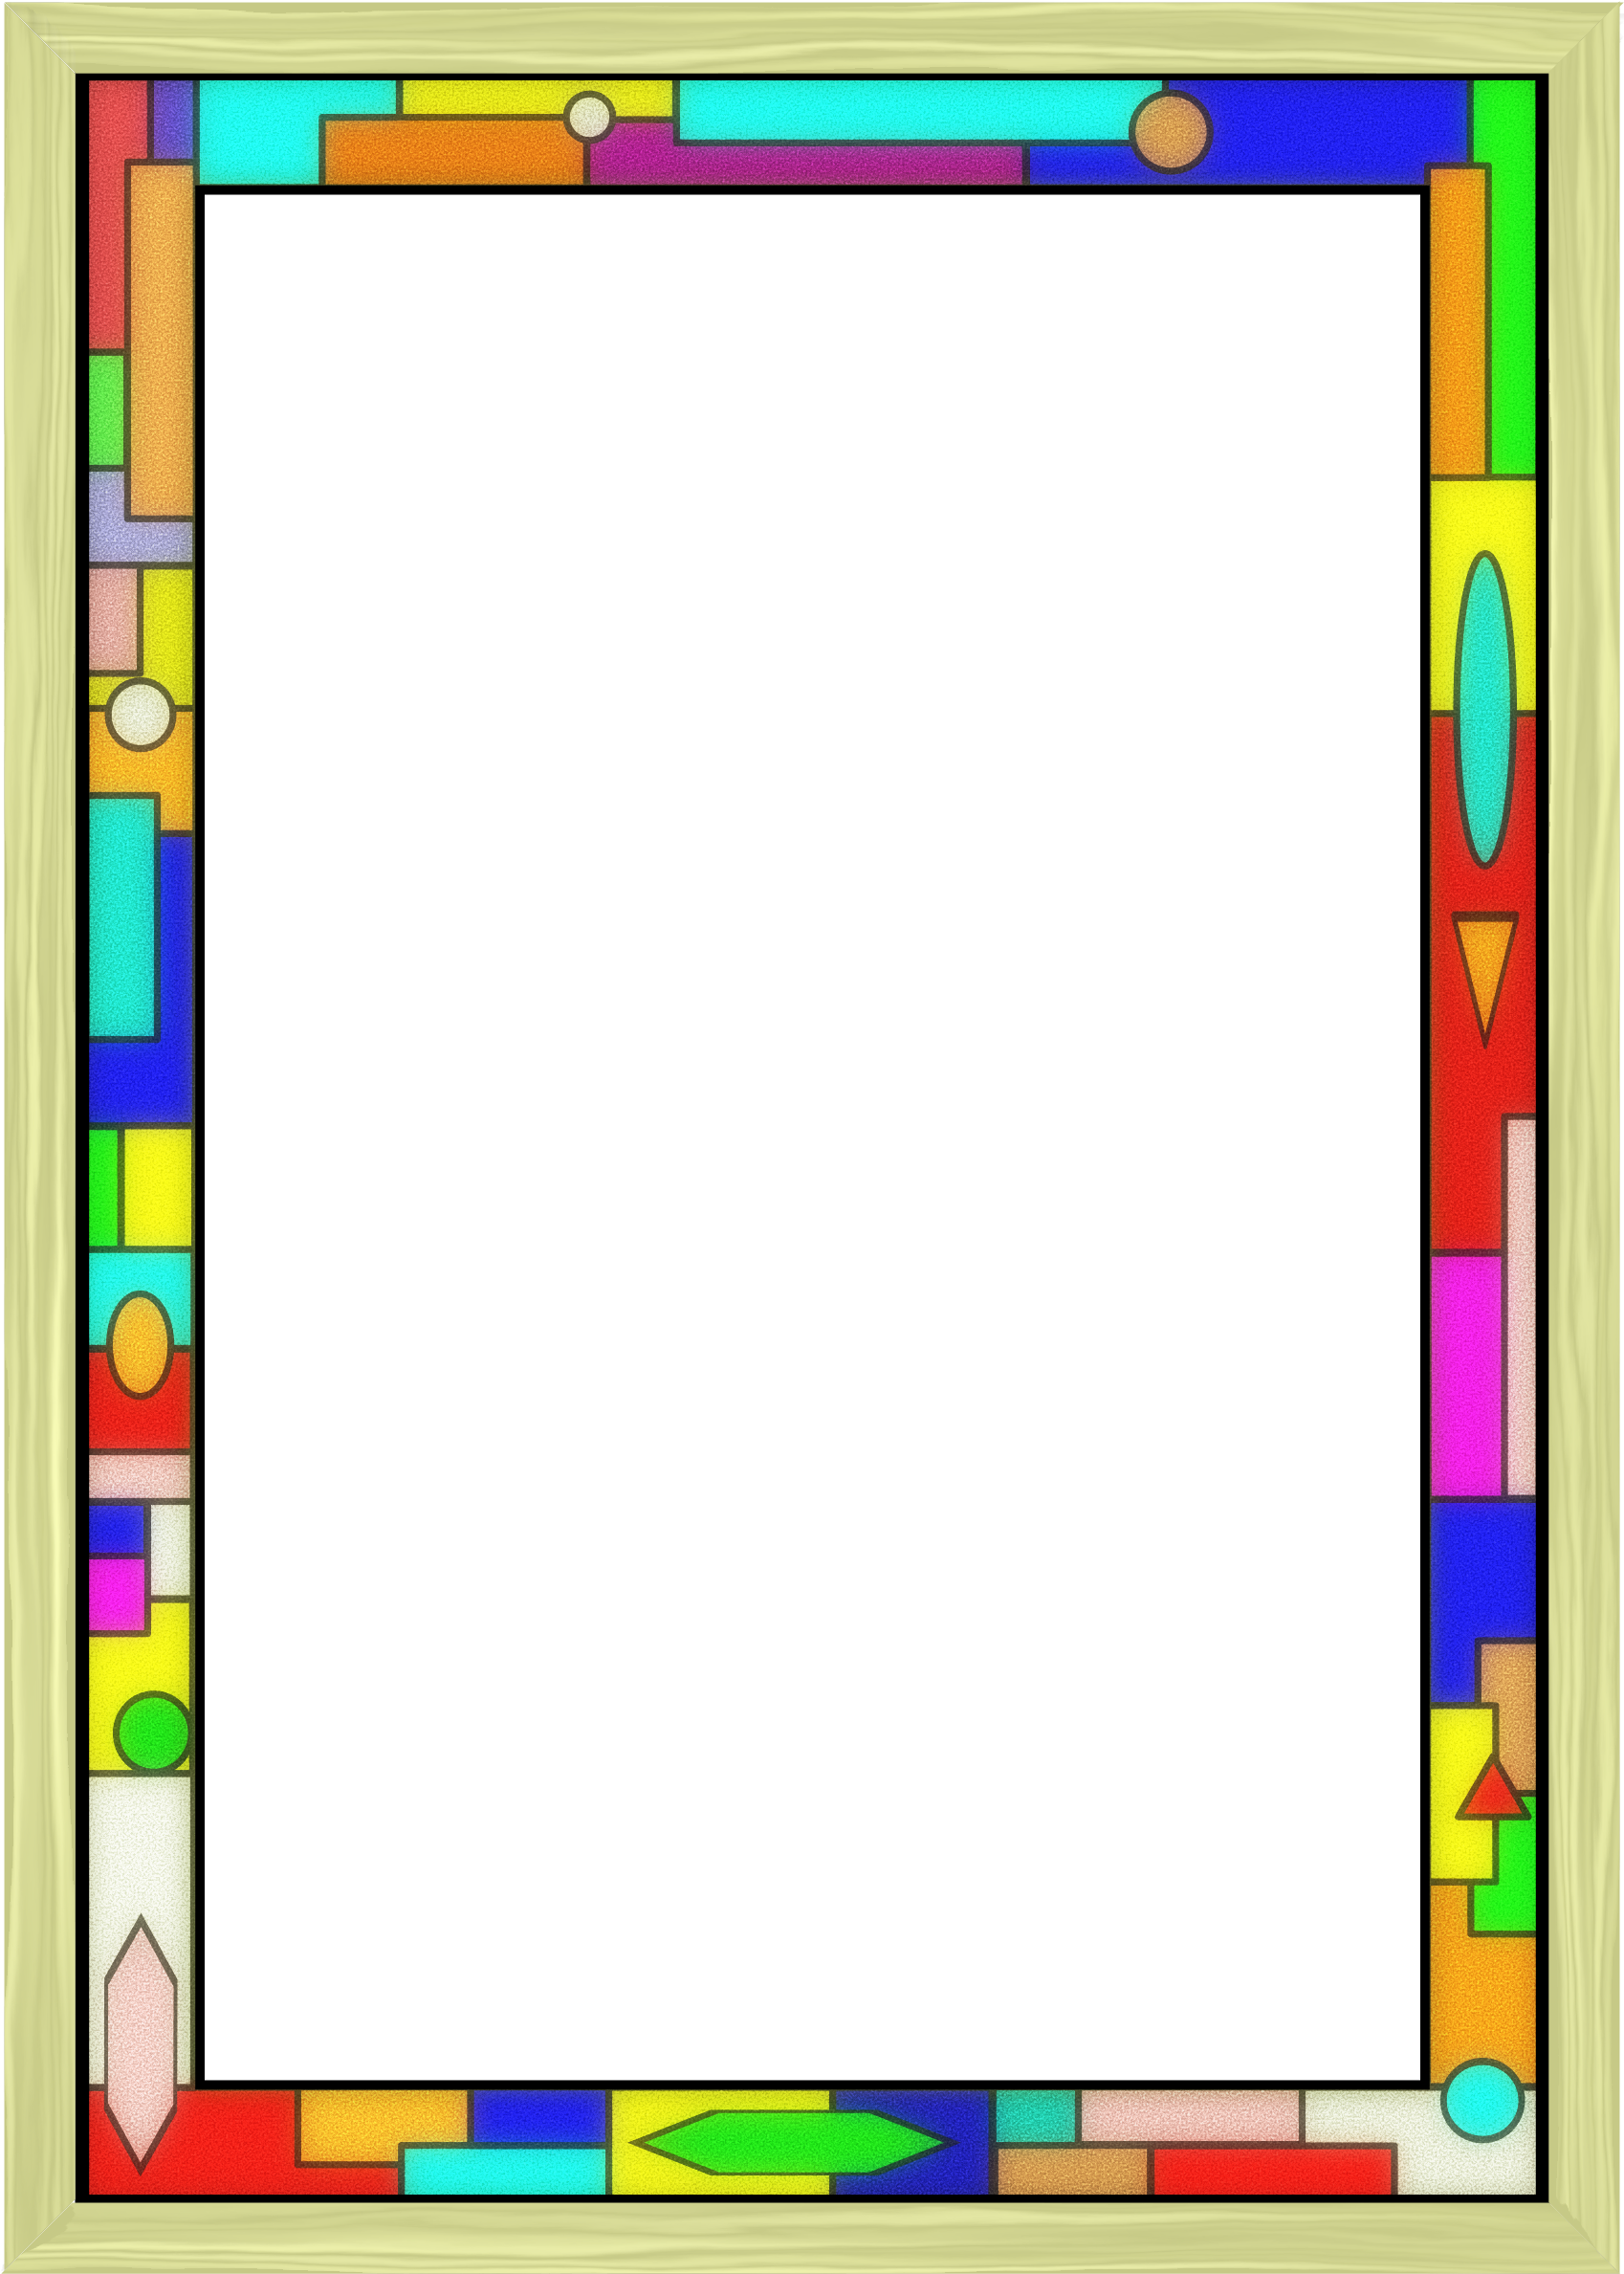 A Rectangular Frame With Colorful Designs